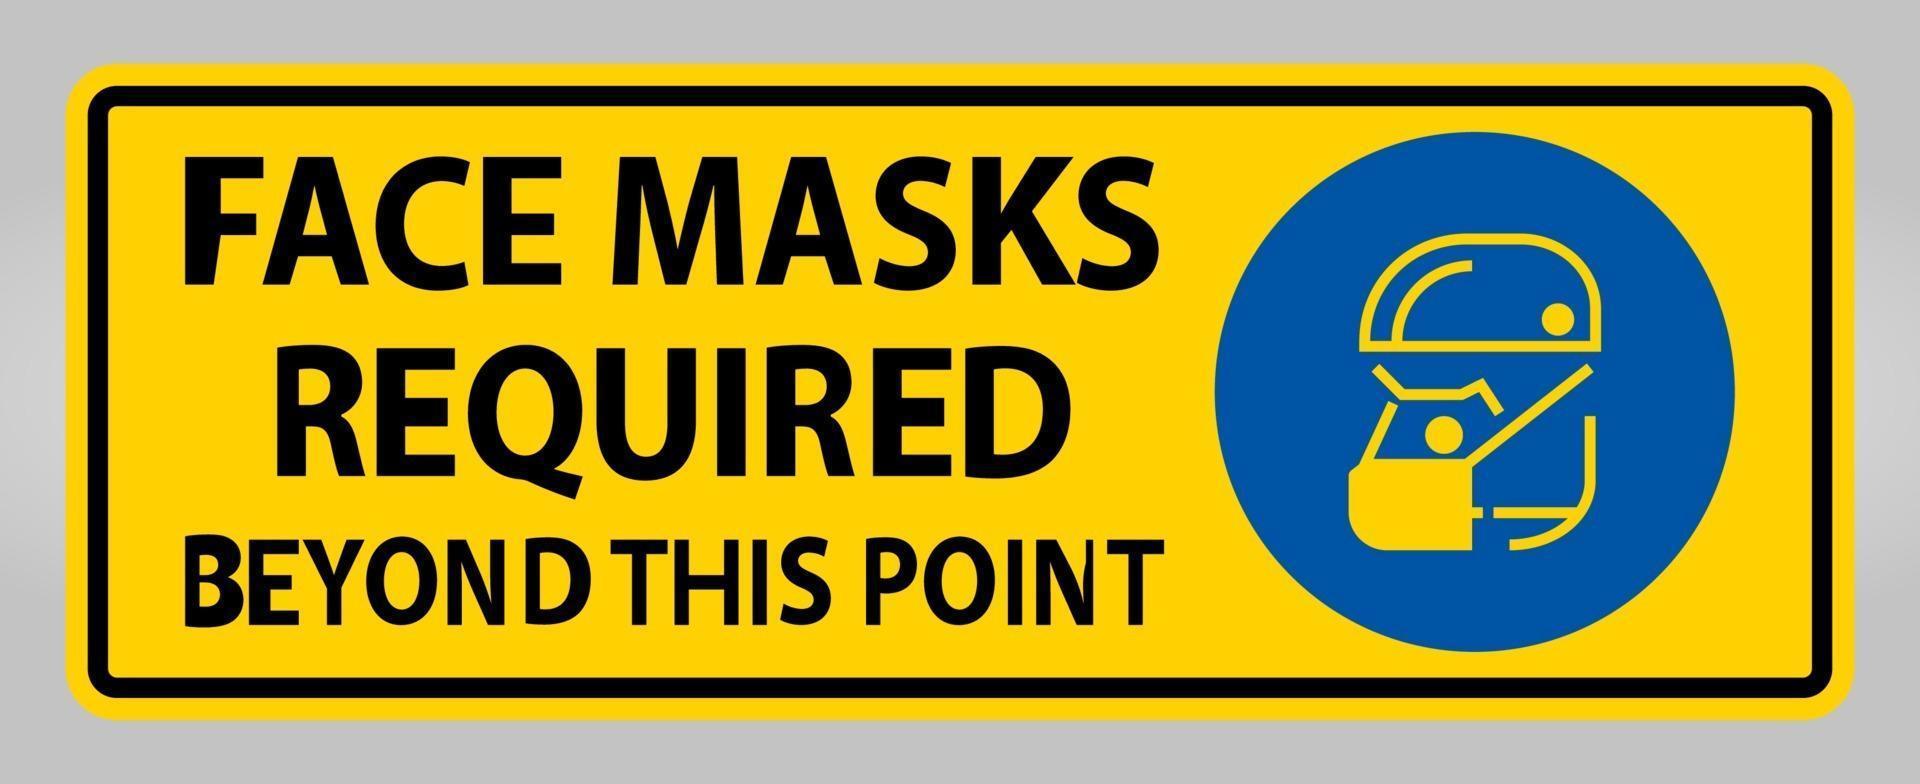 Face Masks Required Beyond This Point Sign Isolate On White Background,Vector Illustration EPS.10 vector